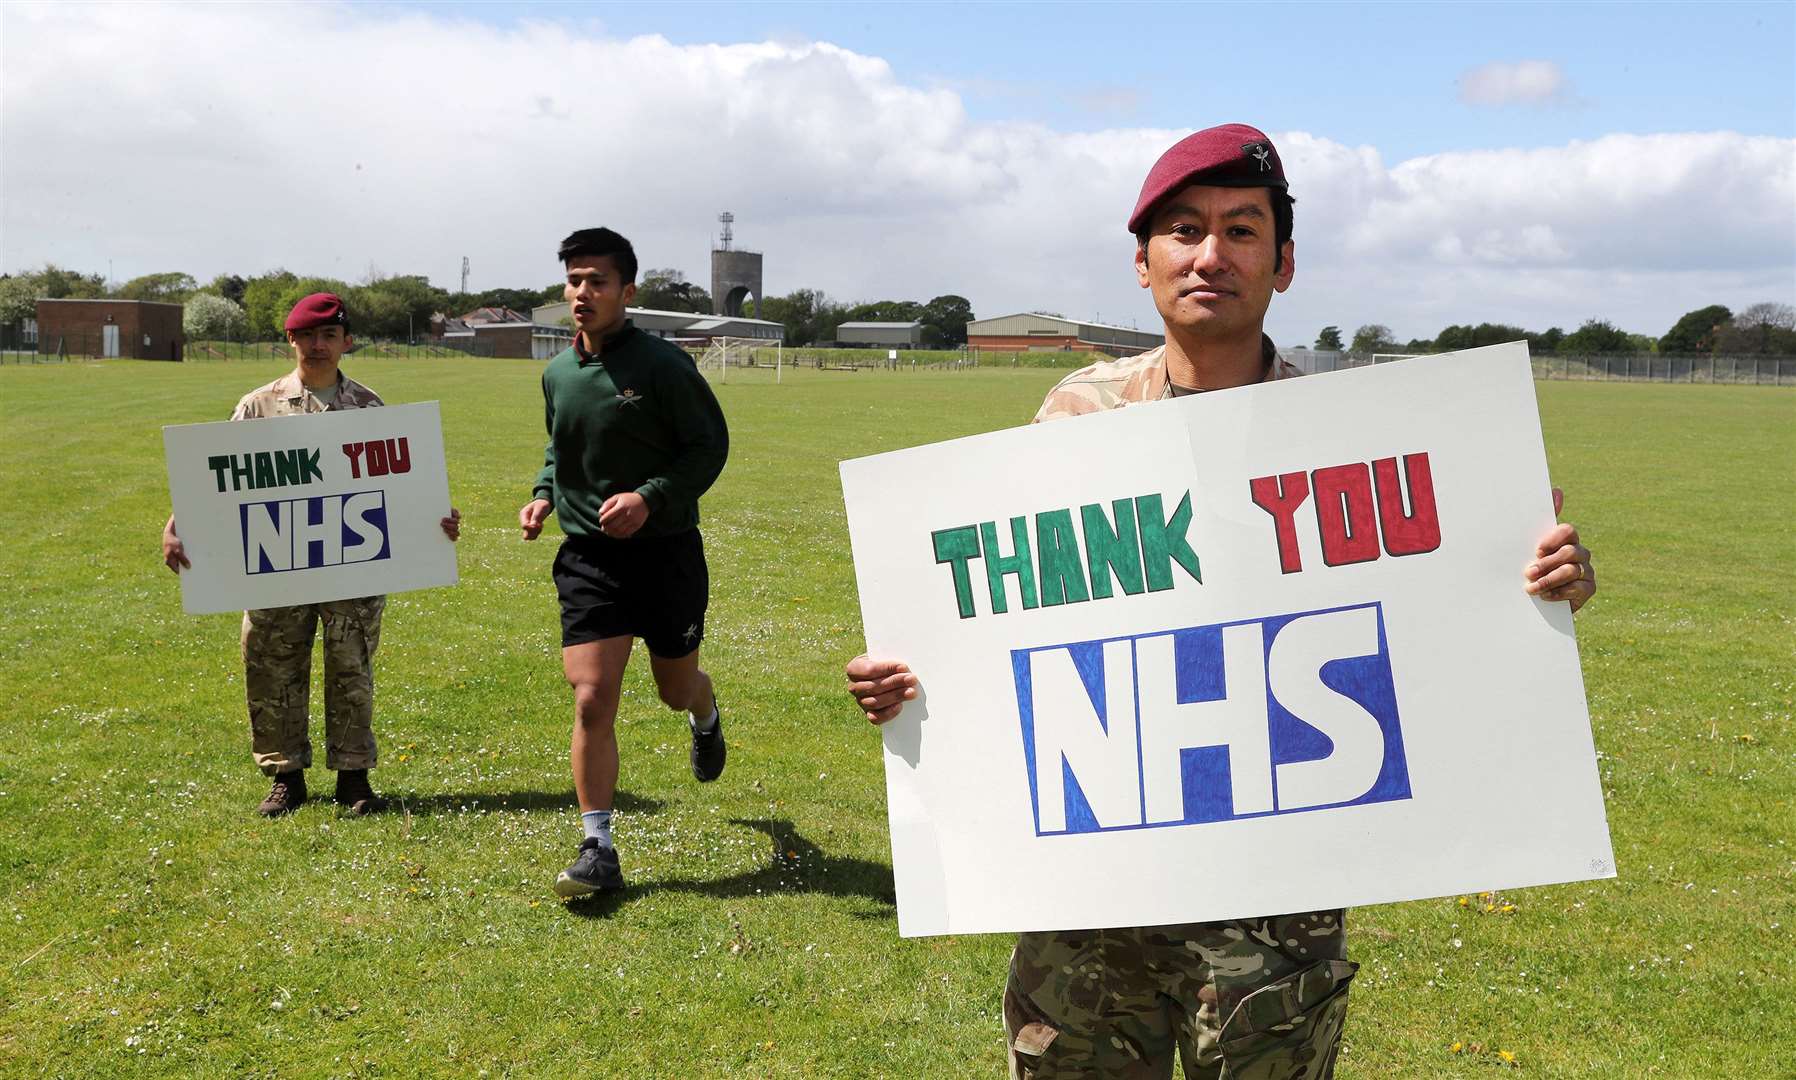 Sgt Indra Grung, Cpl Naresh Rai, of The Royal Gurkha Rifles based at Sir John Moore Barracks in Shorncliffe, Folkestone, took part in a charity run around the camp over four days in aid of the NHS, to equal the distance of running form Lands End to John O’Groats.